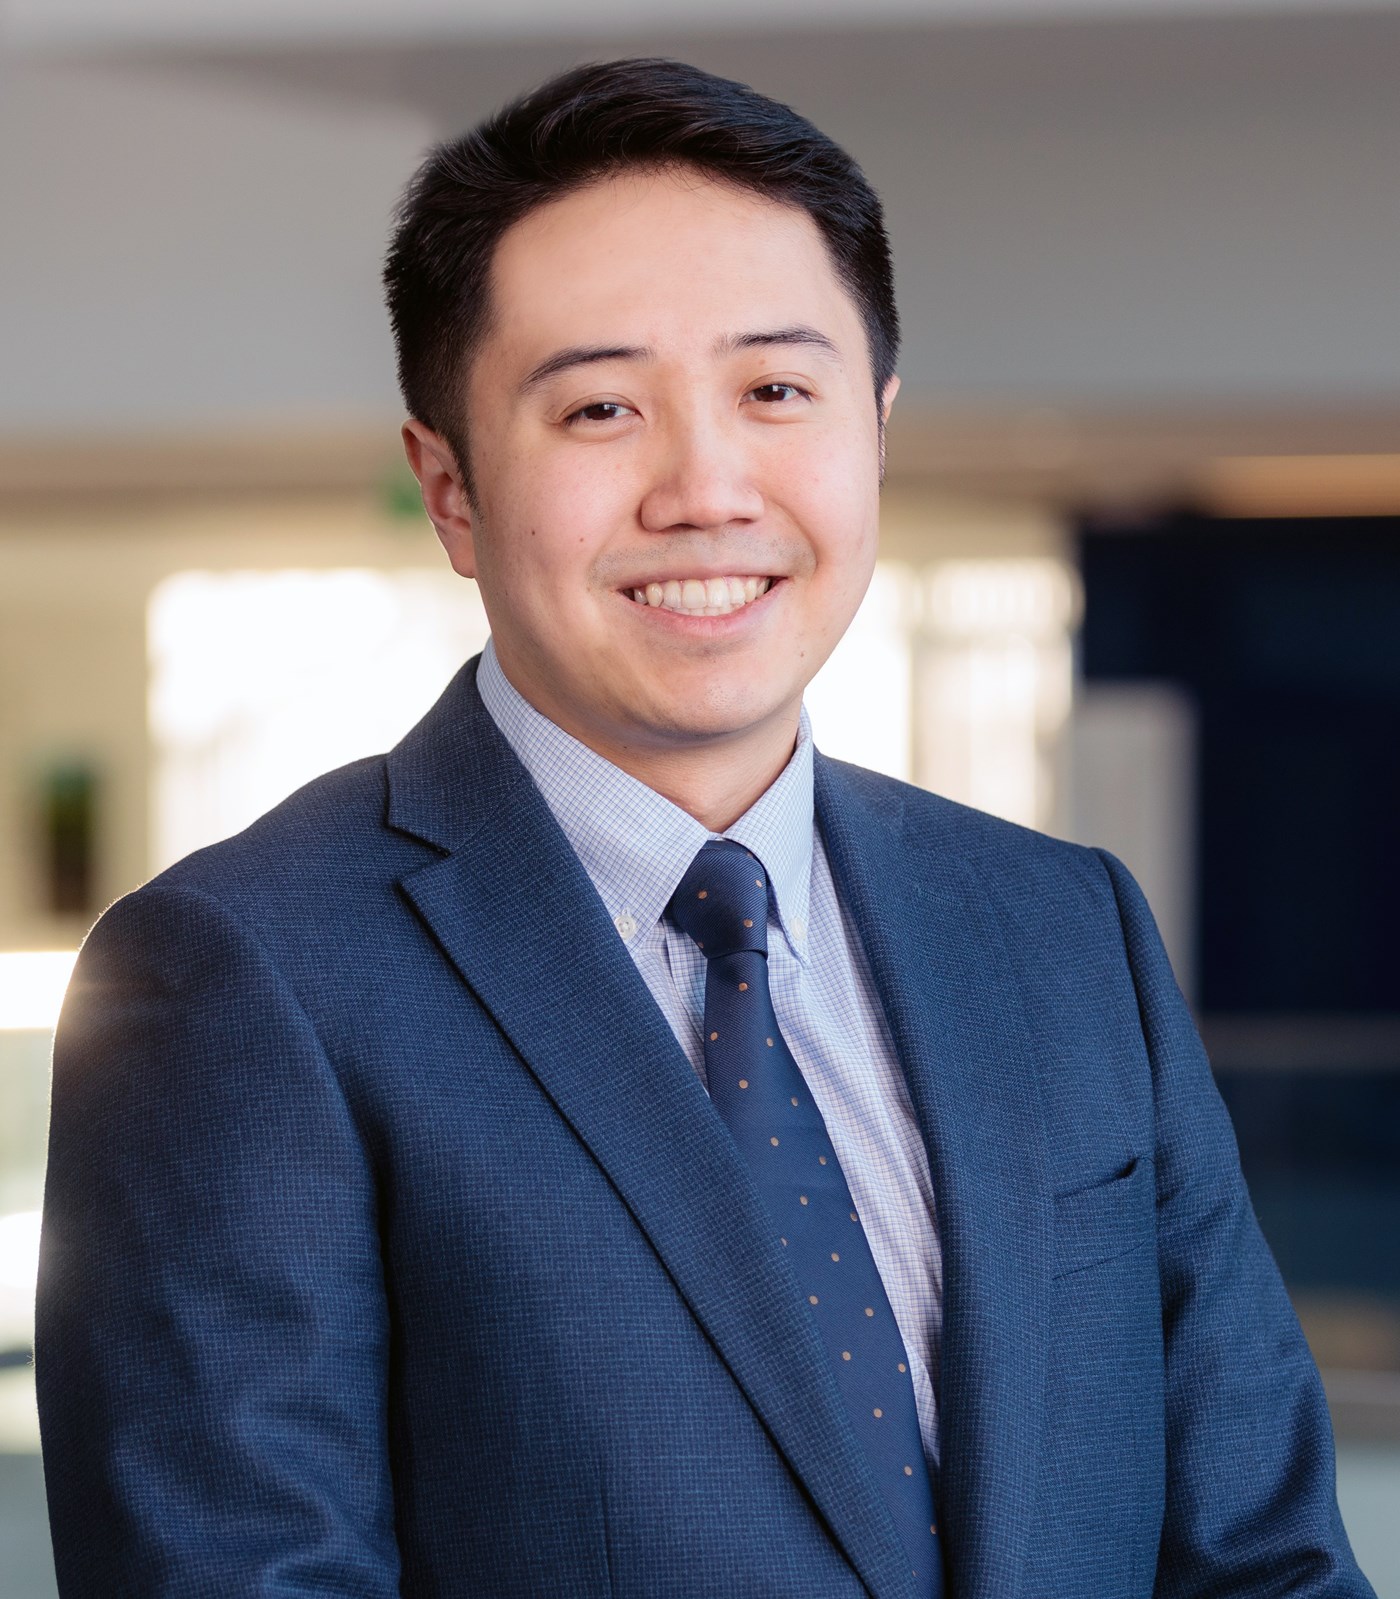 Stephen Lam is an Assistant Professor in the Chemical Engineering Department at UMass Lowell.